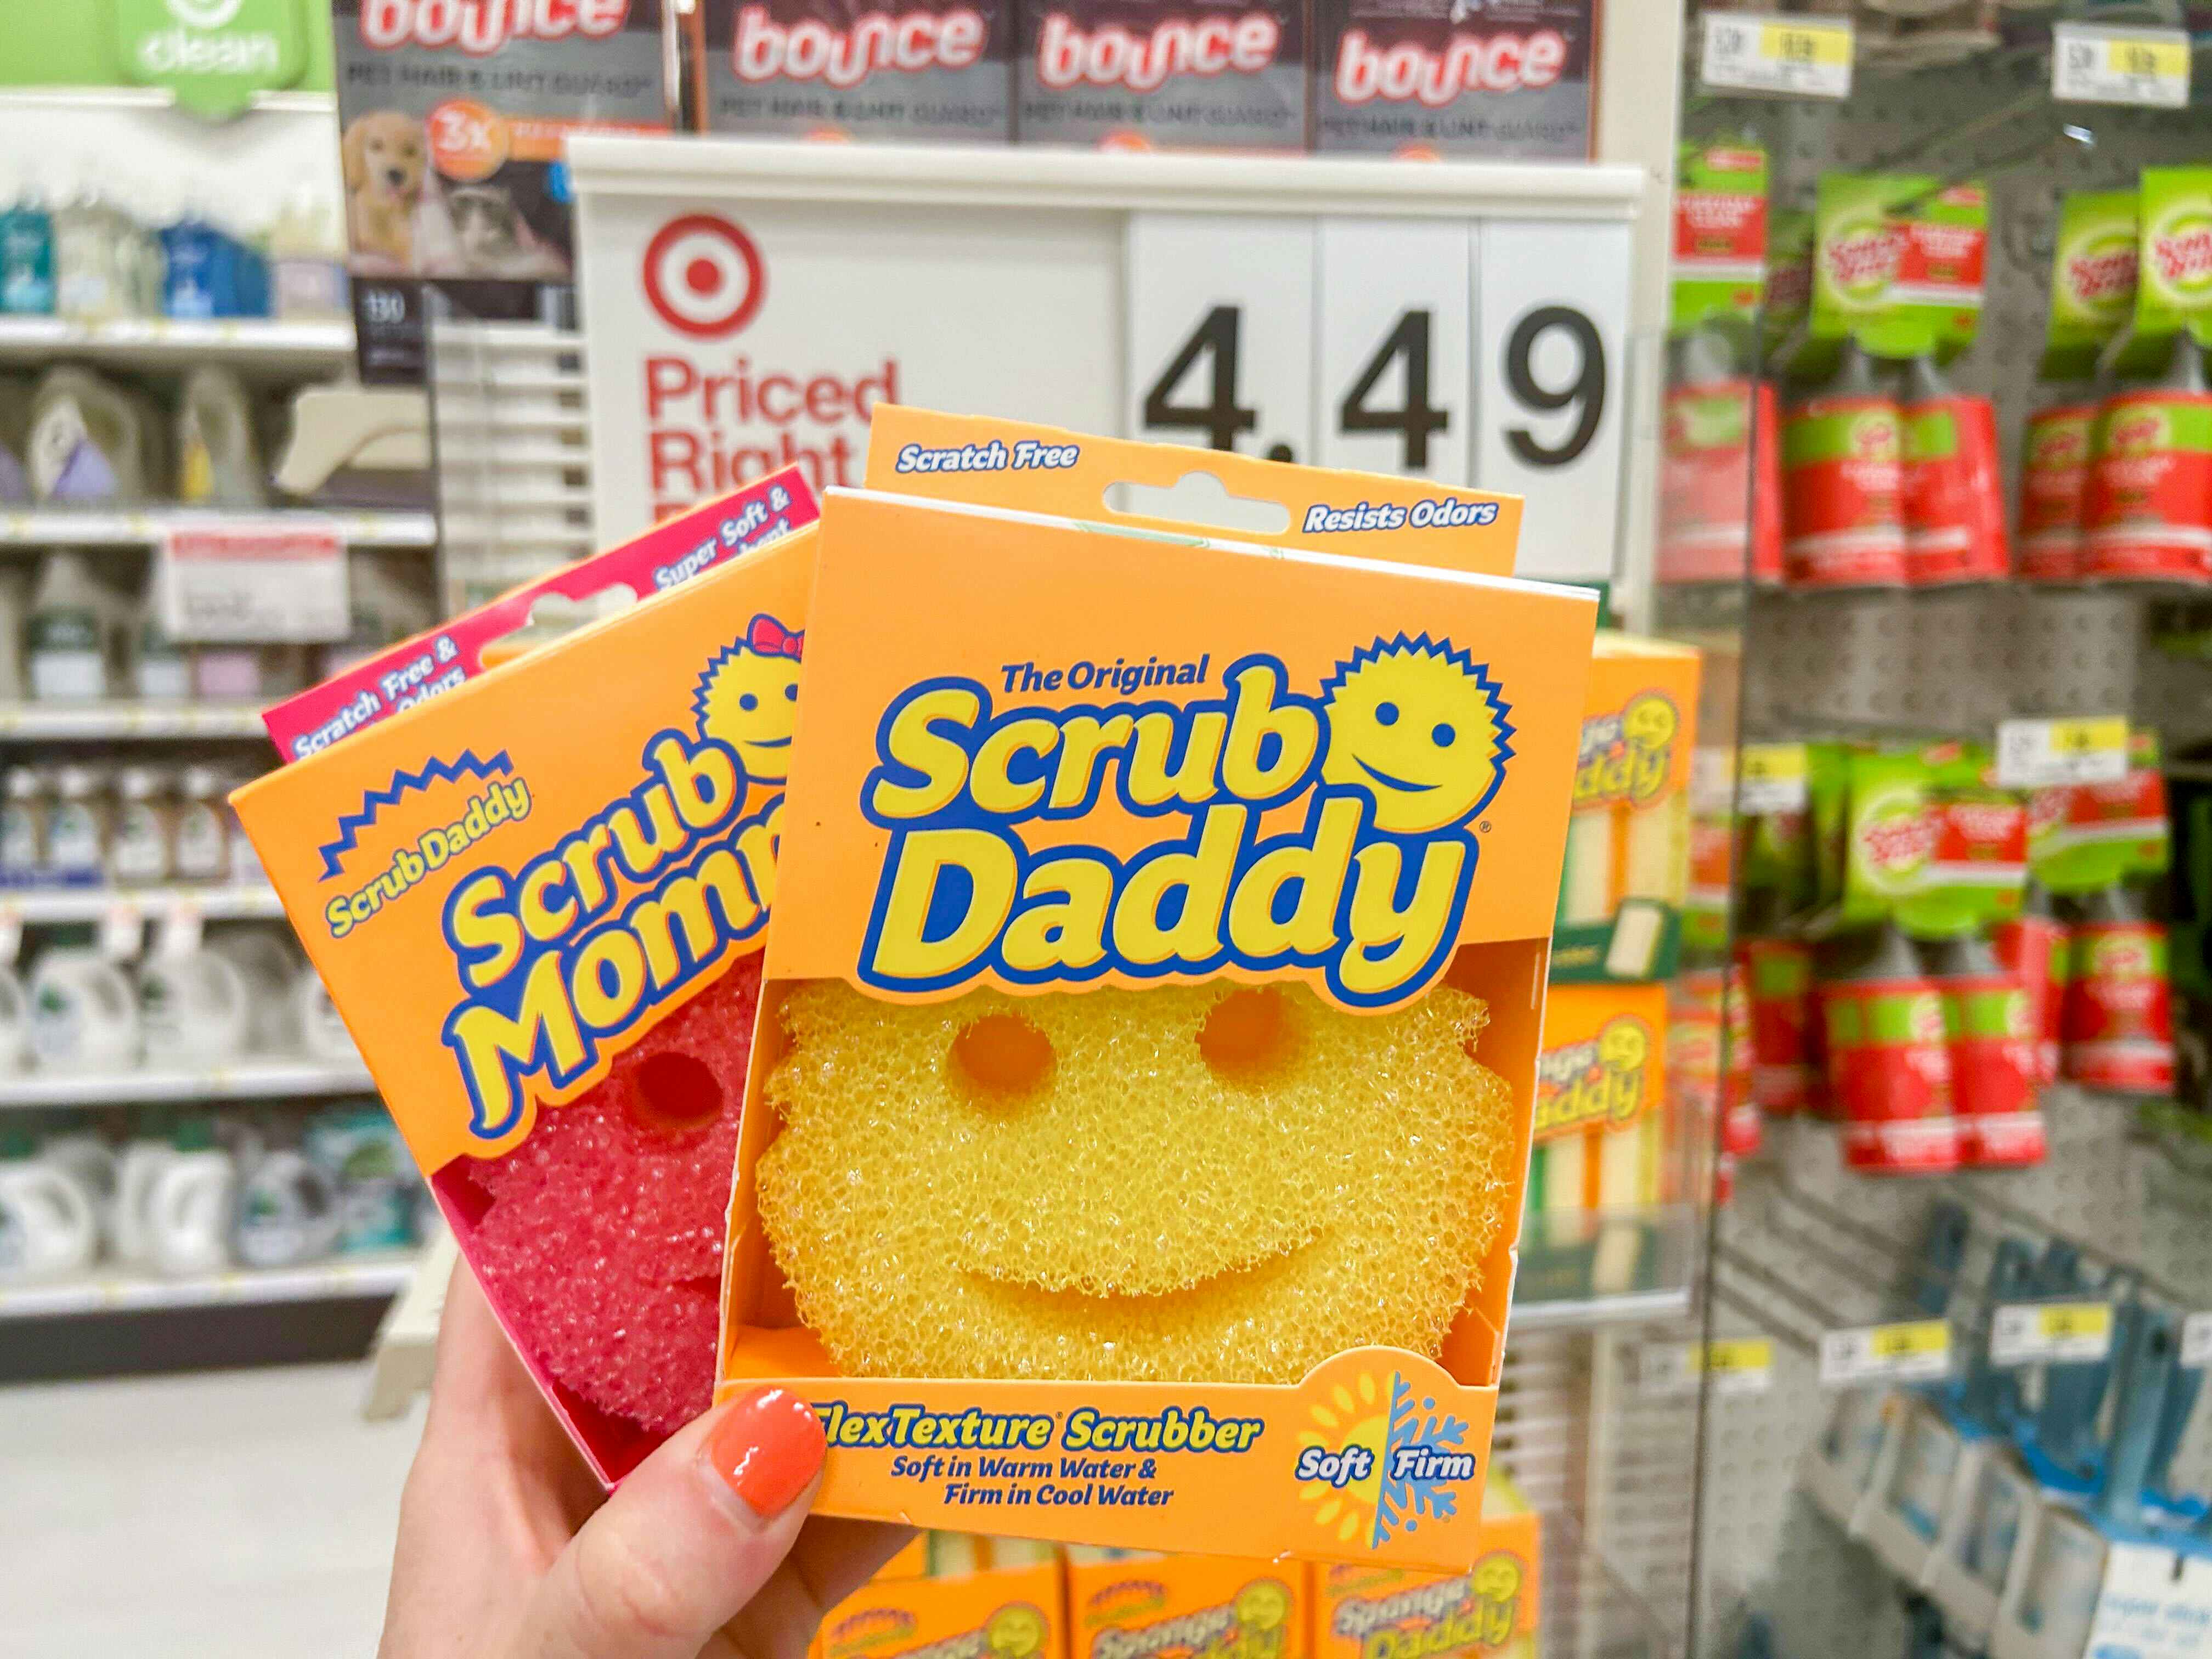 https://prod-cdn-thekrazycouponlady.imgix.net/wp-content/uploads/2023/05/grab-scrub-daddy-products-at-target-scrub-daddy-and-mommy-kcl-1684503329-1684503329.jpg?auto=format&fit=fill&q=25